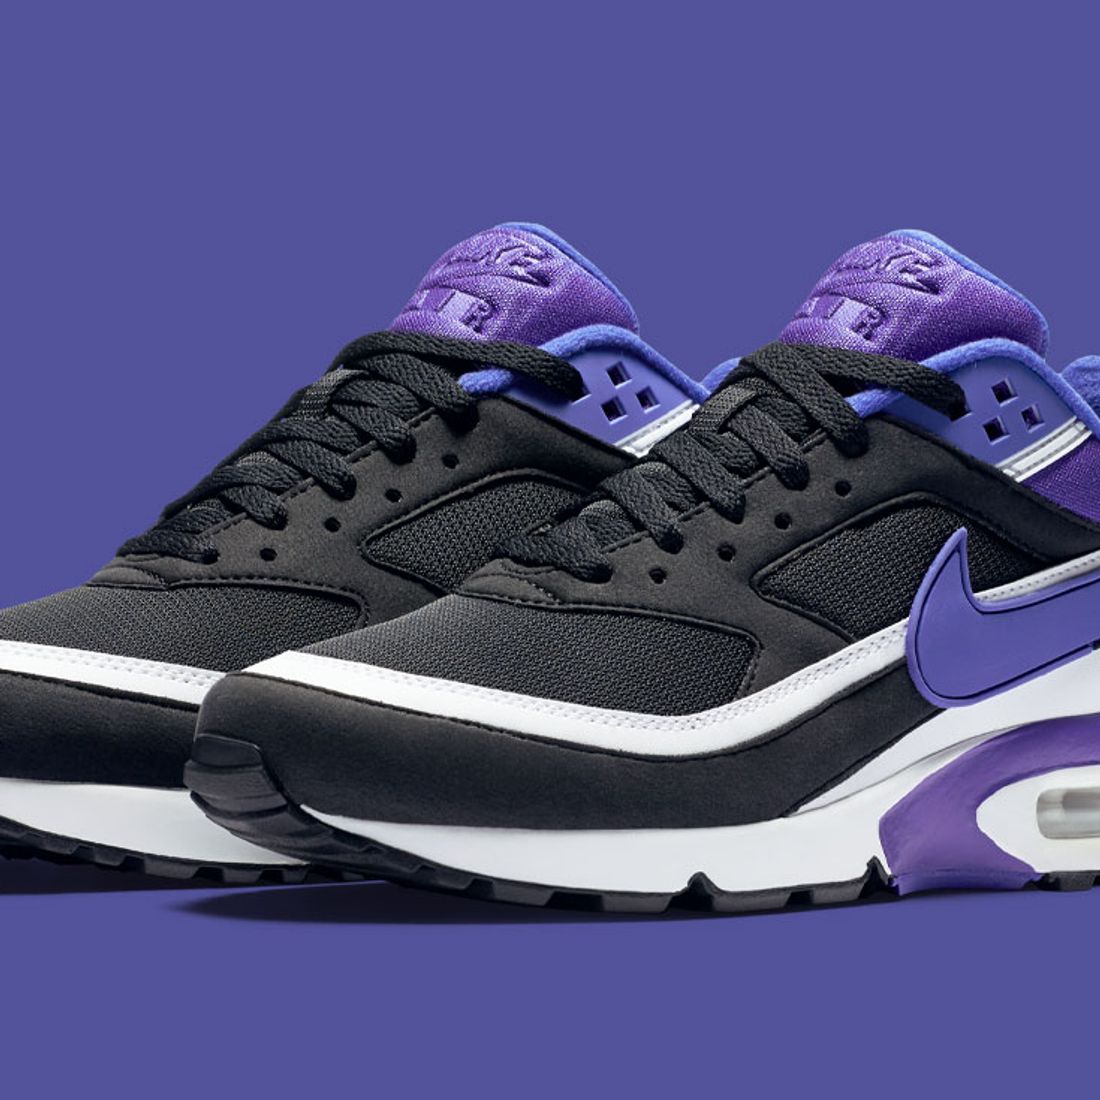 Molestar Muy lejos resumen 5 Obscure Facts About the Nike Air Max BW - Sneaker Freaker